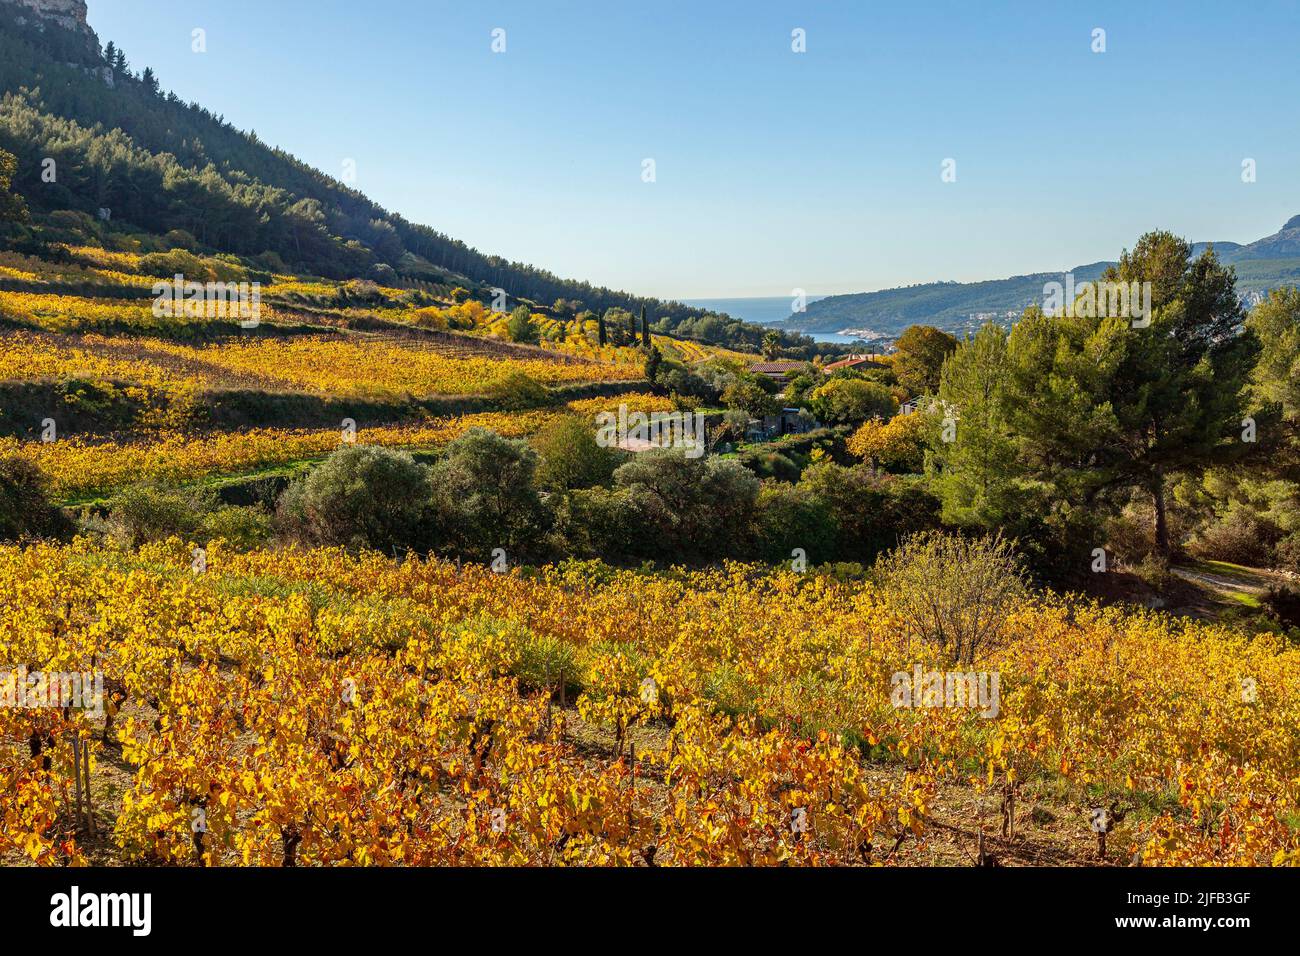 France, Bouches du Rhone, Cassis, the vines in Autumn Stock Photo